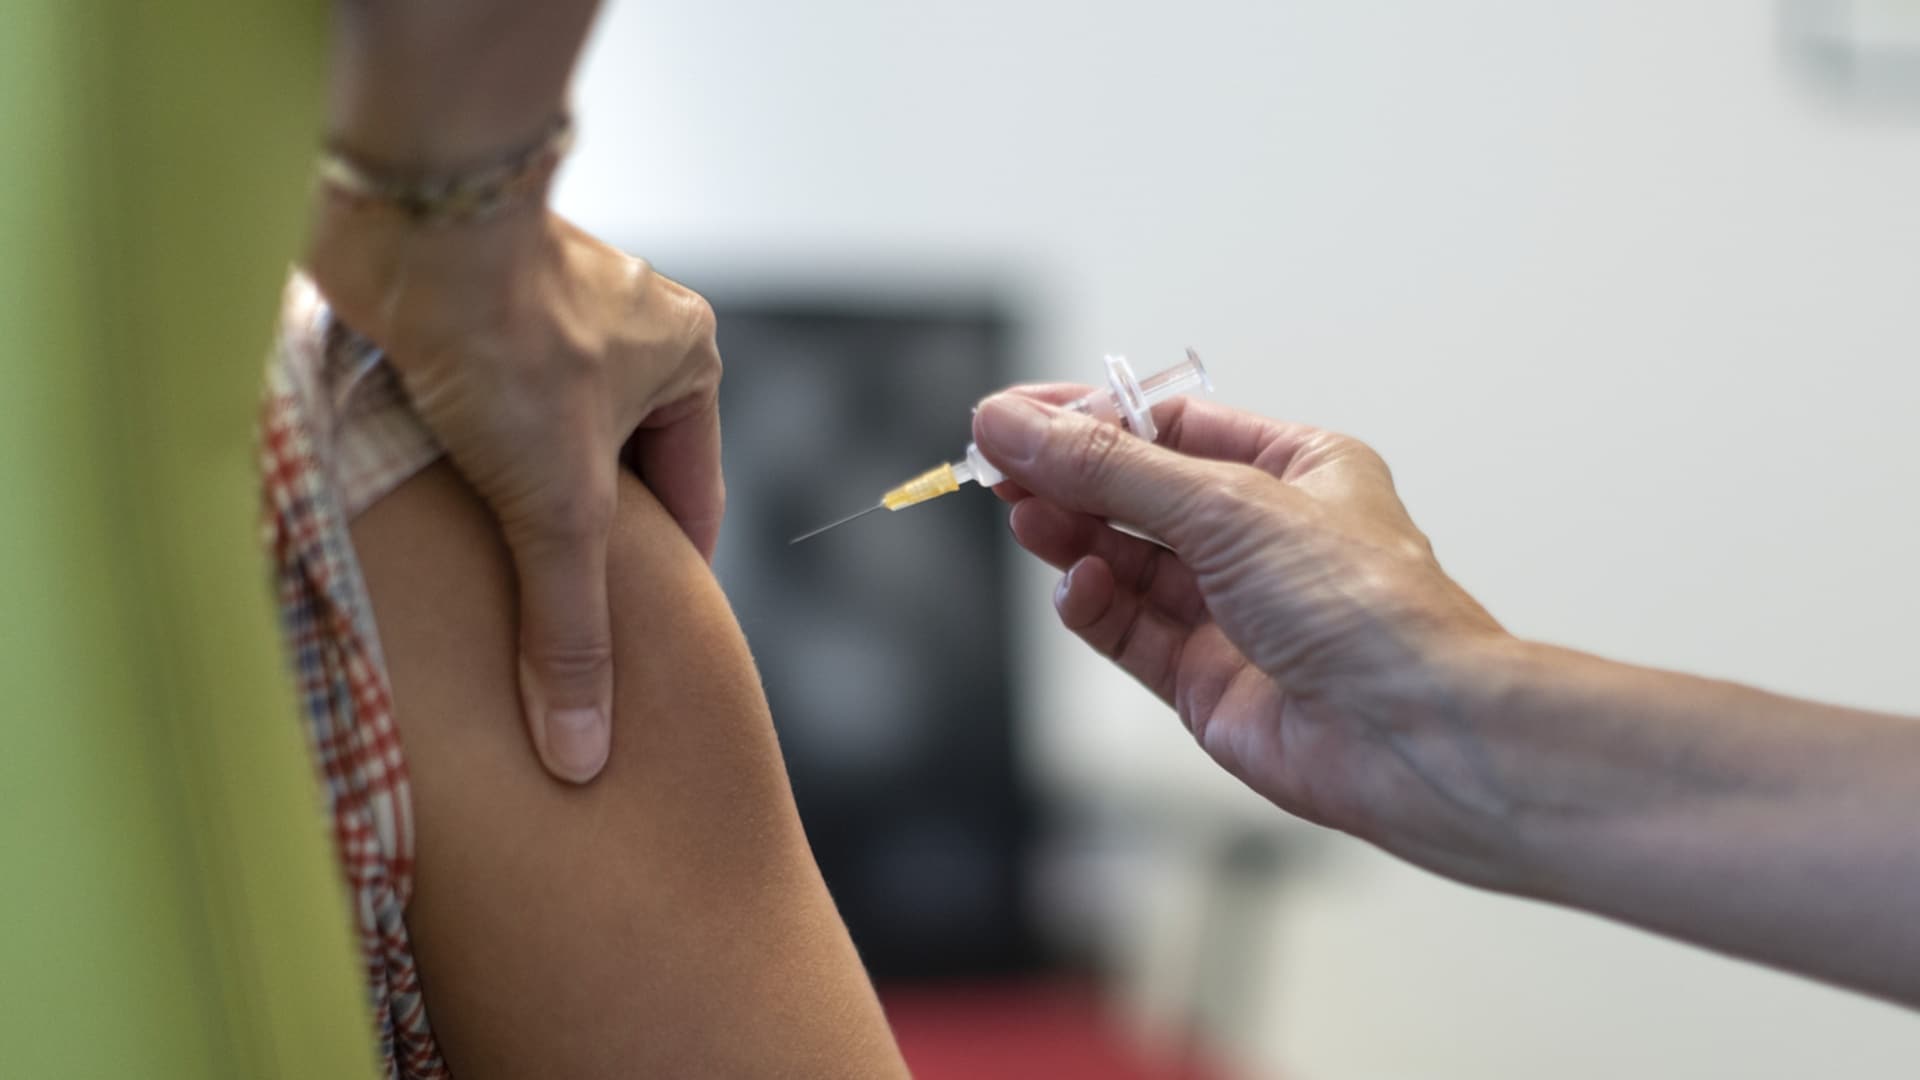 Significant progress in the Swiss vaccination campaign